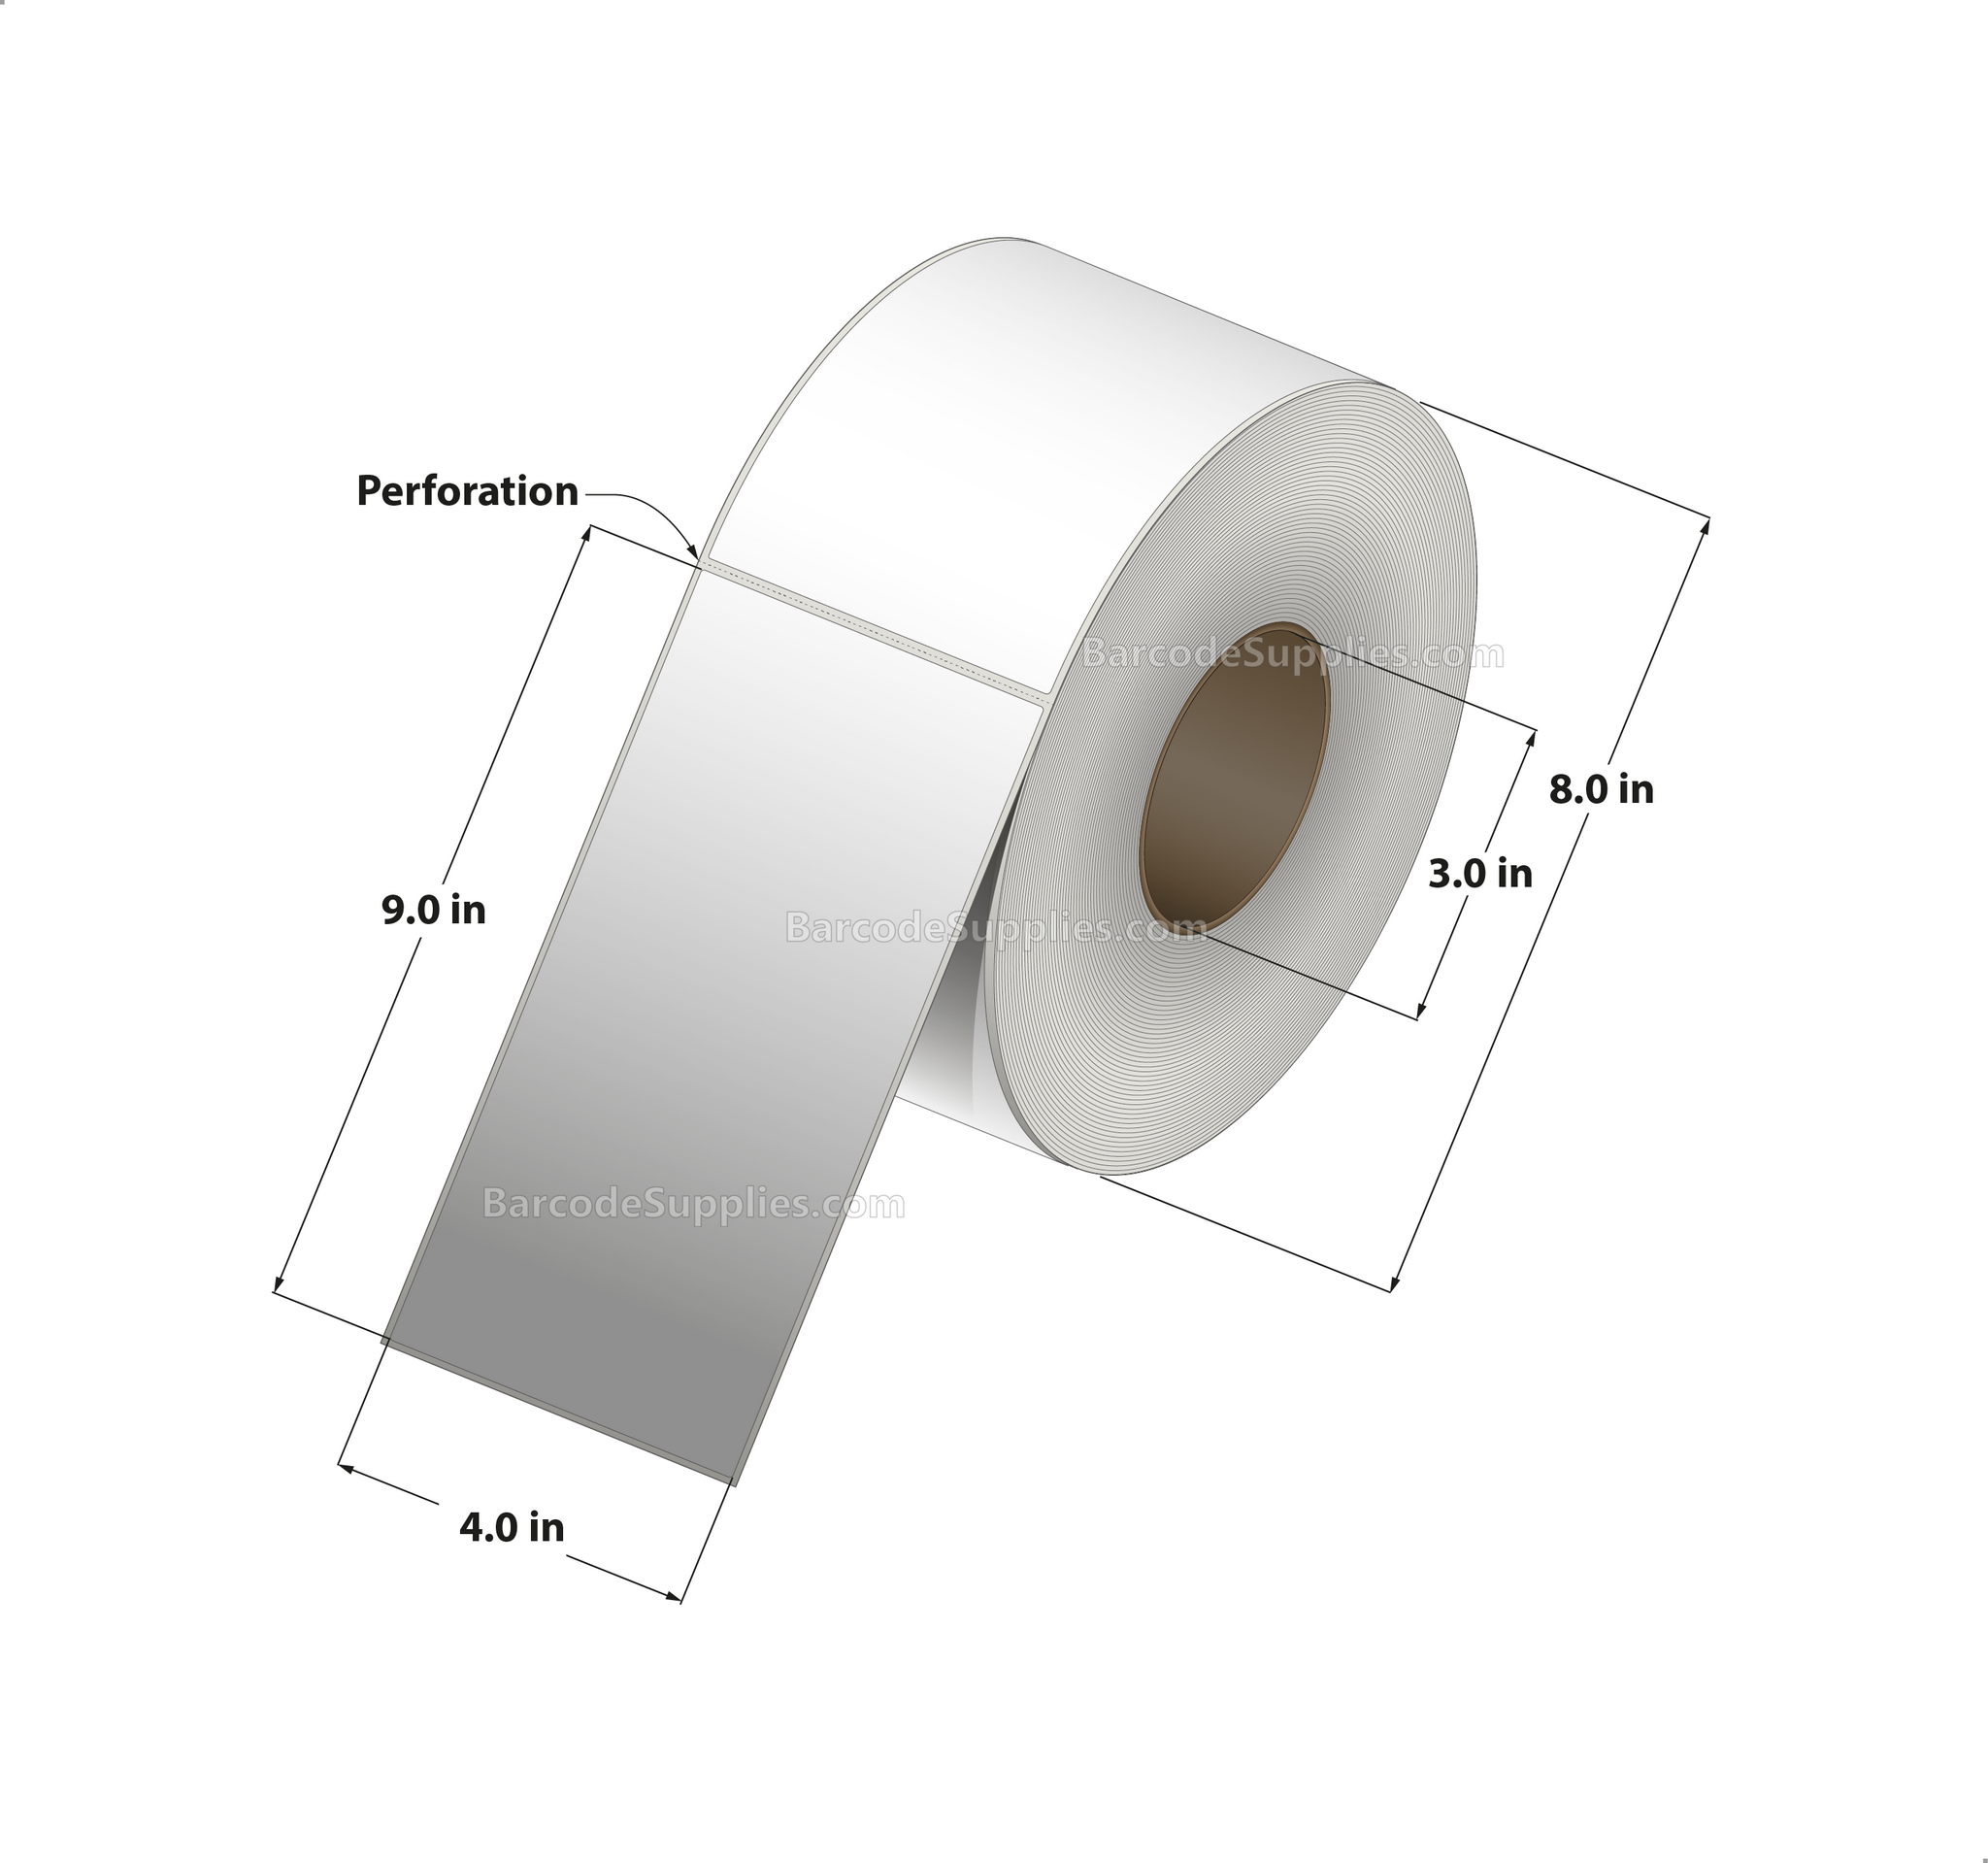 4 x 9 Thermal Transfer White Labels With Rubber Adhesive - Perforated - 750 Labels Per Roll - Carton Of 4 Rolls - 3000 Labels Total - MPN: CTT400900-3P